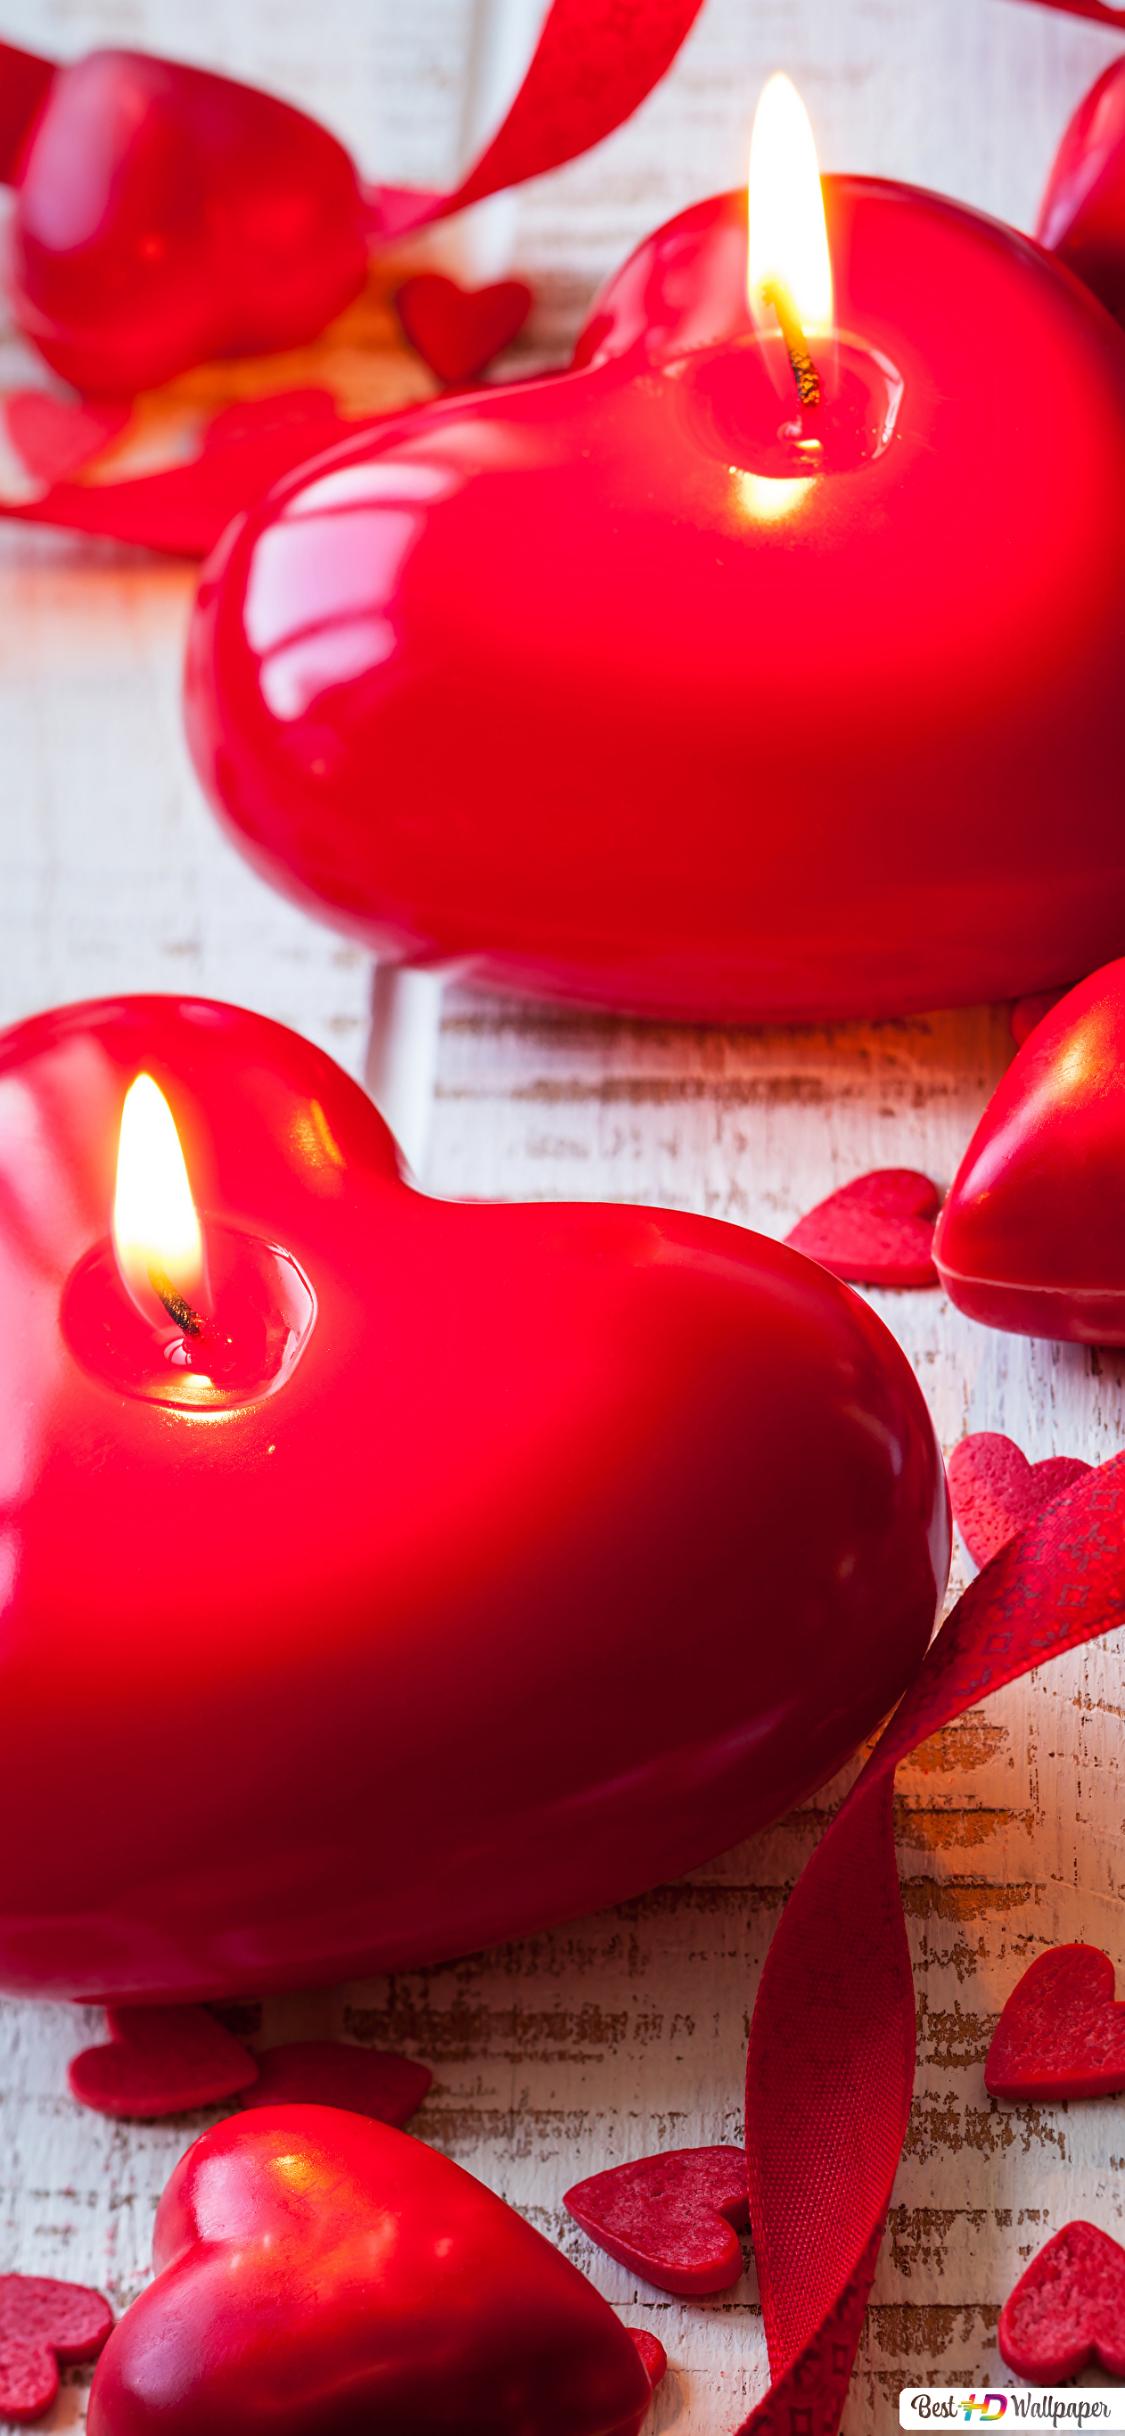 Valentine's day candles decorations HD wallpaper download's Day wallpaper